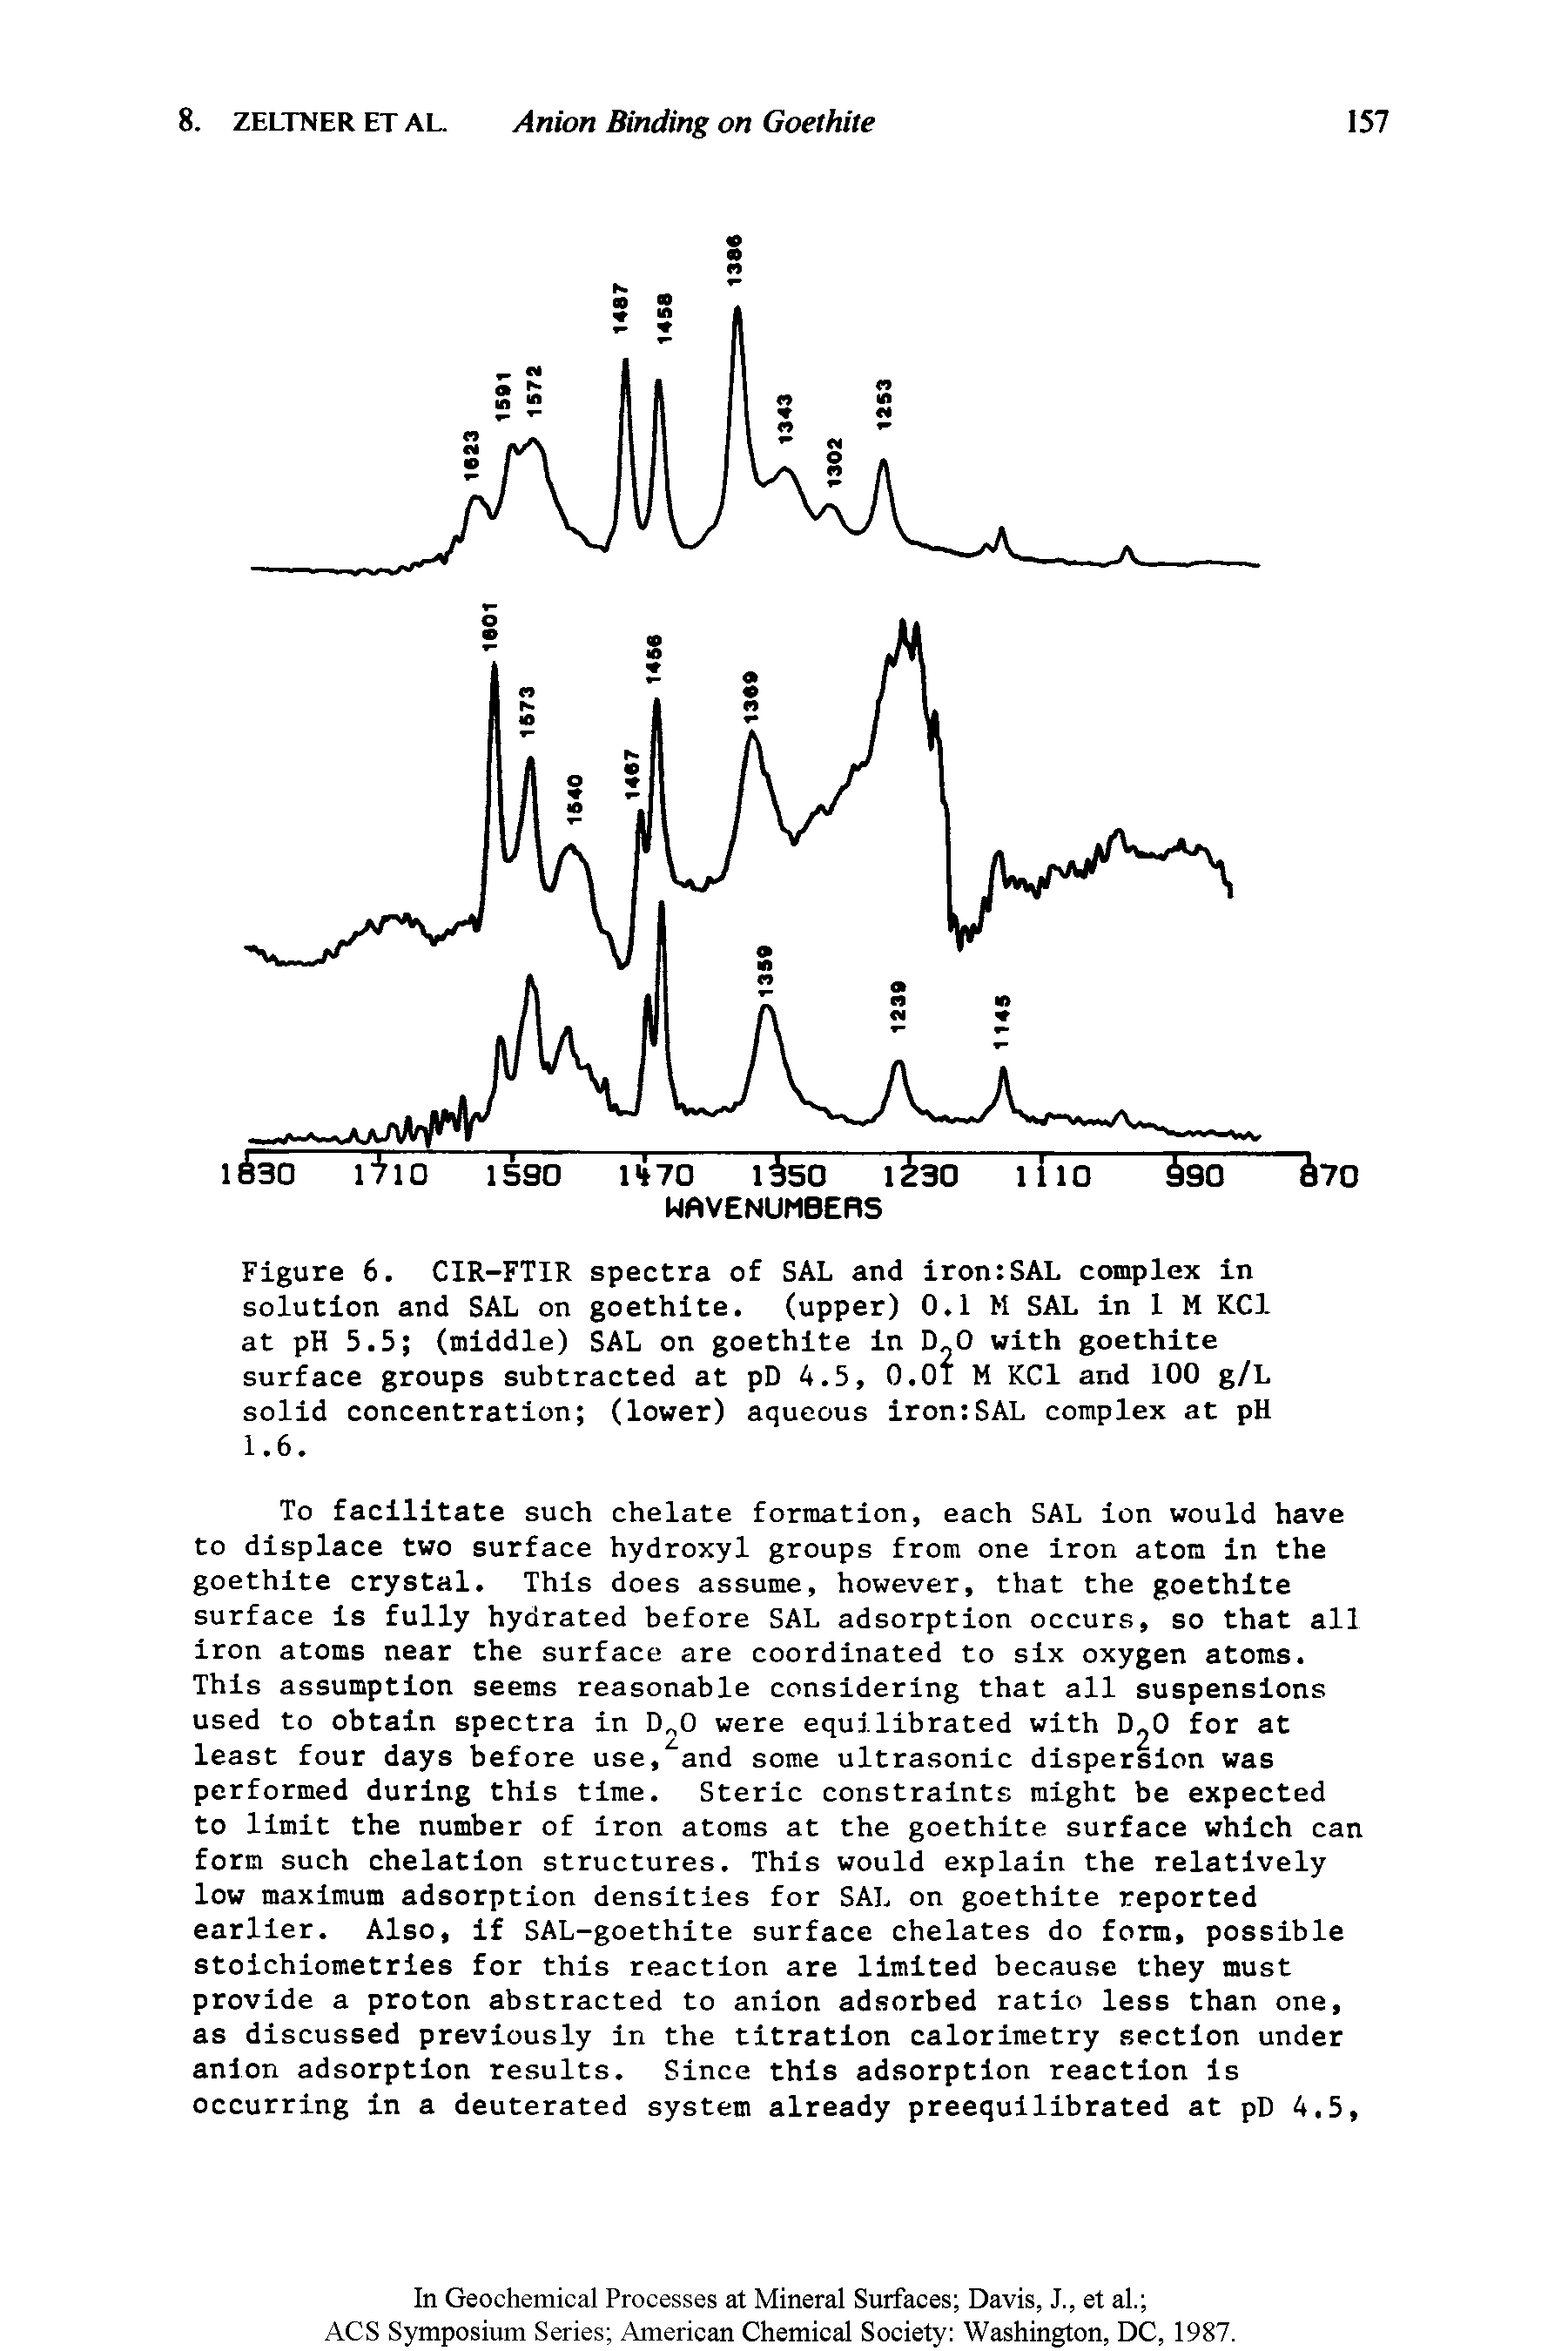 Figure 6. CIR-FTIR spectra of SAL and iron SAL complex in solution and SAL on goethite. (upper) 0.1 M SAL in 1 M KC1 at pH 5.5 (middle) SAL on goethite in D.O with goethite surface groups subtracted at pD 4.5, 0.01 M KC1 and 100 g/L solid concentration (lower) aqueous iron SAL complex at pH 1.6.